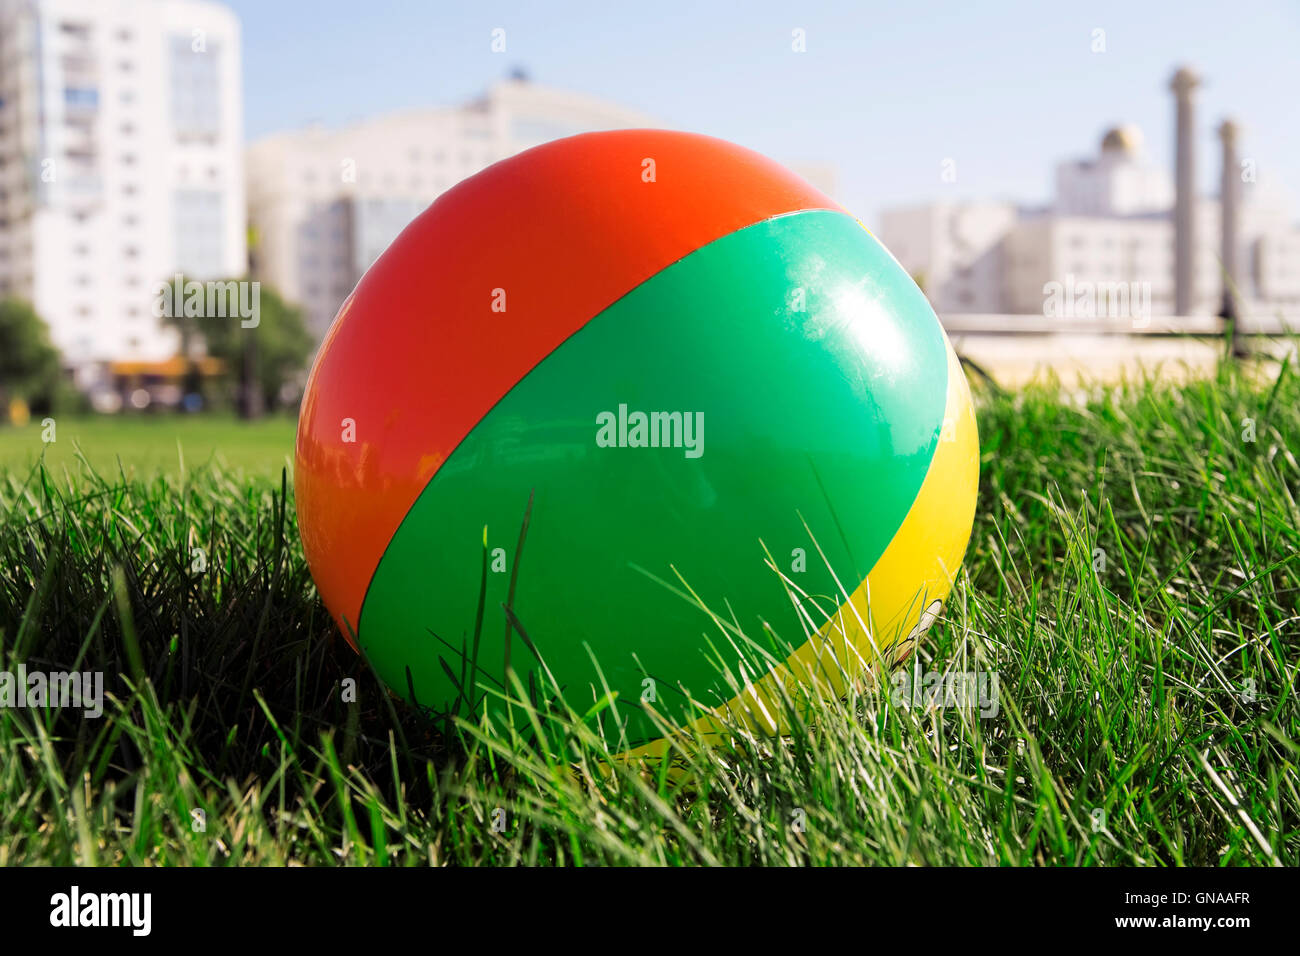 ball for outdoor games lying on grass Stock Photo